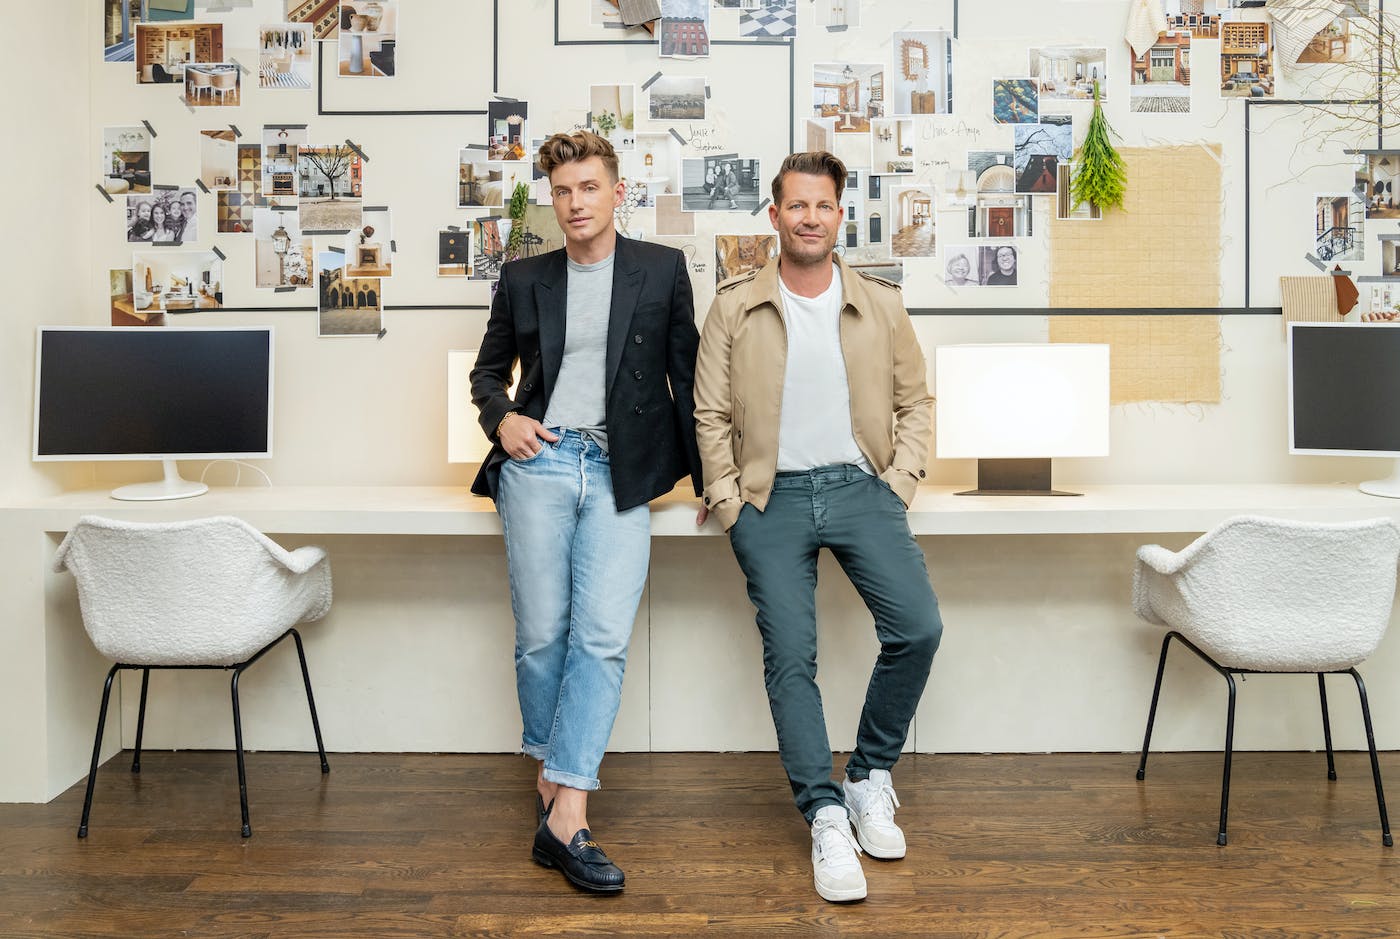 In July, interior design duo Nate Berkus and Jeremiah Brent launched their new Living Spaces Collection, featuring a range of homeware pieces that reflect their clean and functional design aesthetic. The collection includes furniture, accessories, and decor items designed to bring a touch of modern elegance to any home.